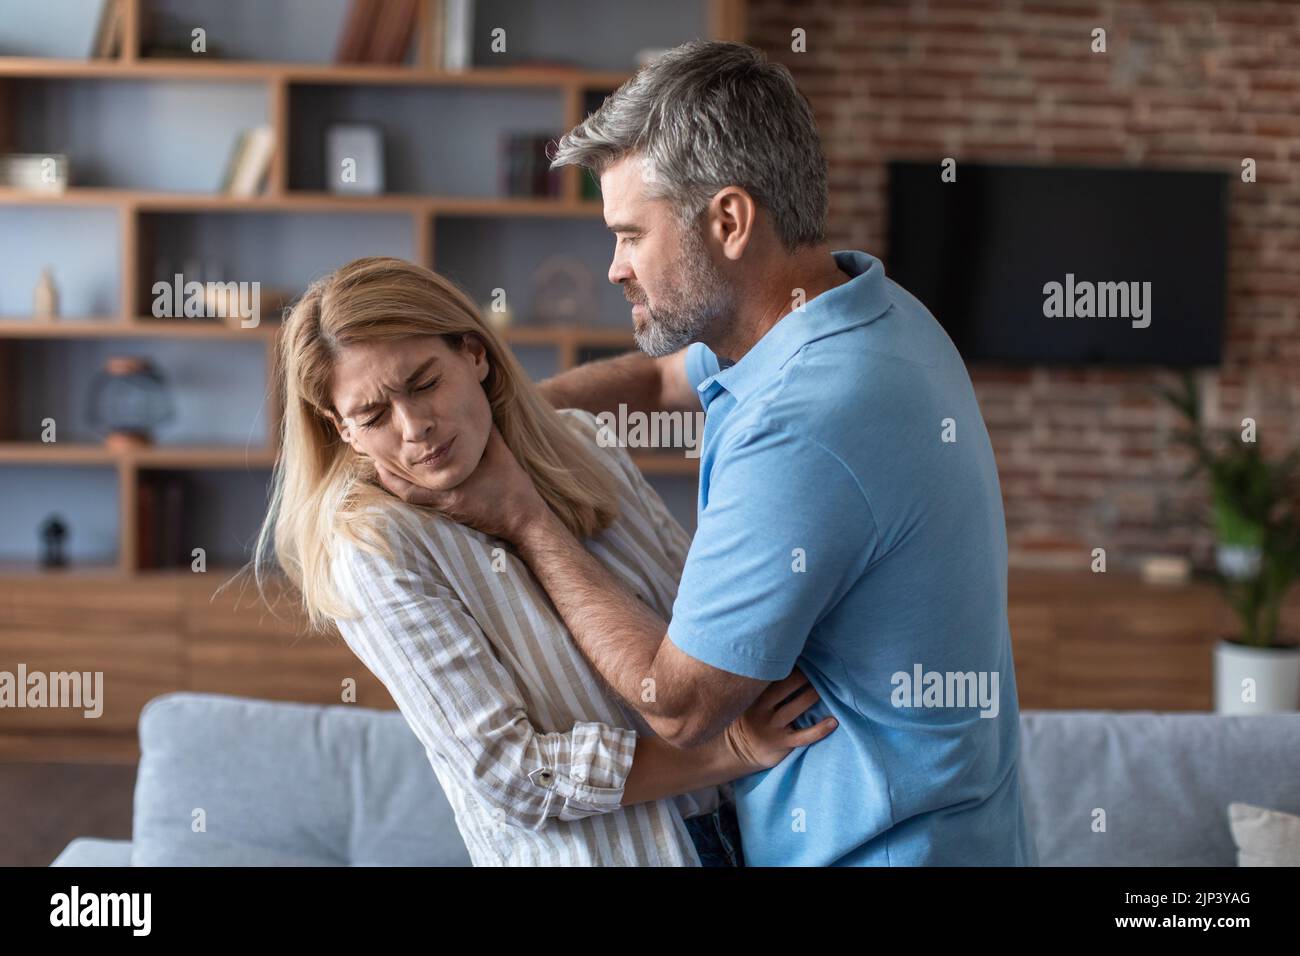 Aggressive angry european husband strangles behind proud frightened afraid wife in living room interior Stock Photo